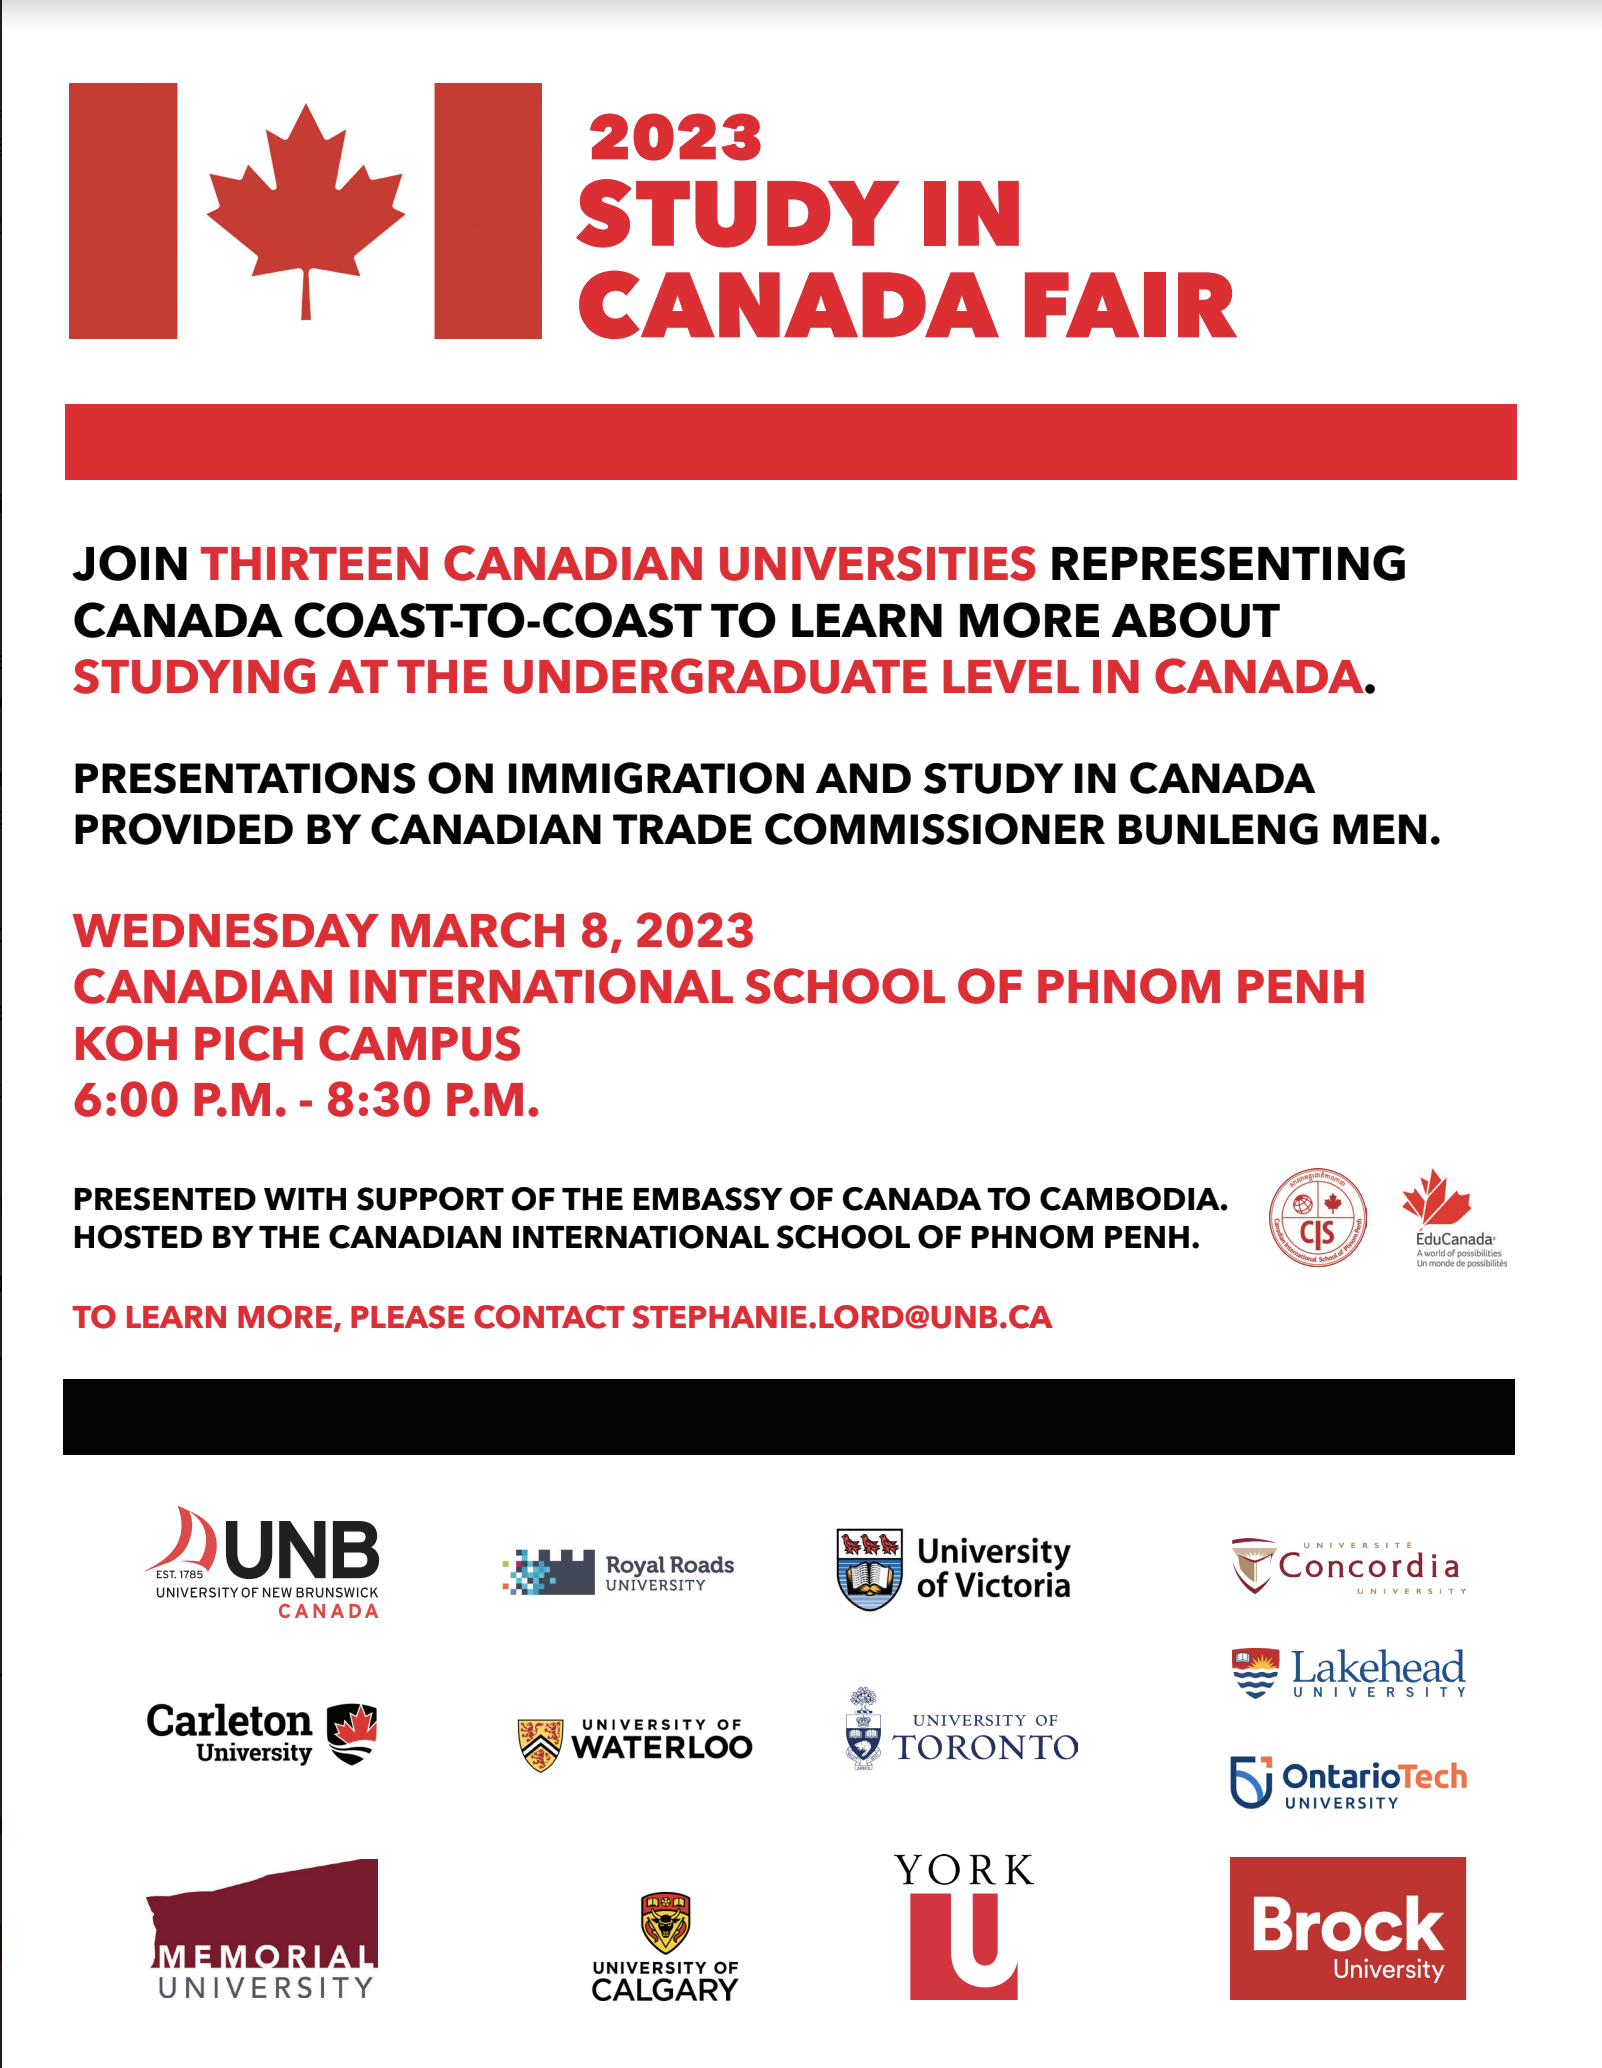 Event informational poster with the flag of Canada at the top left and university logos at the bottom